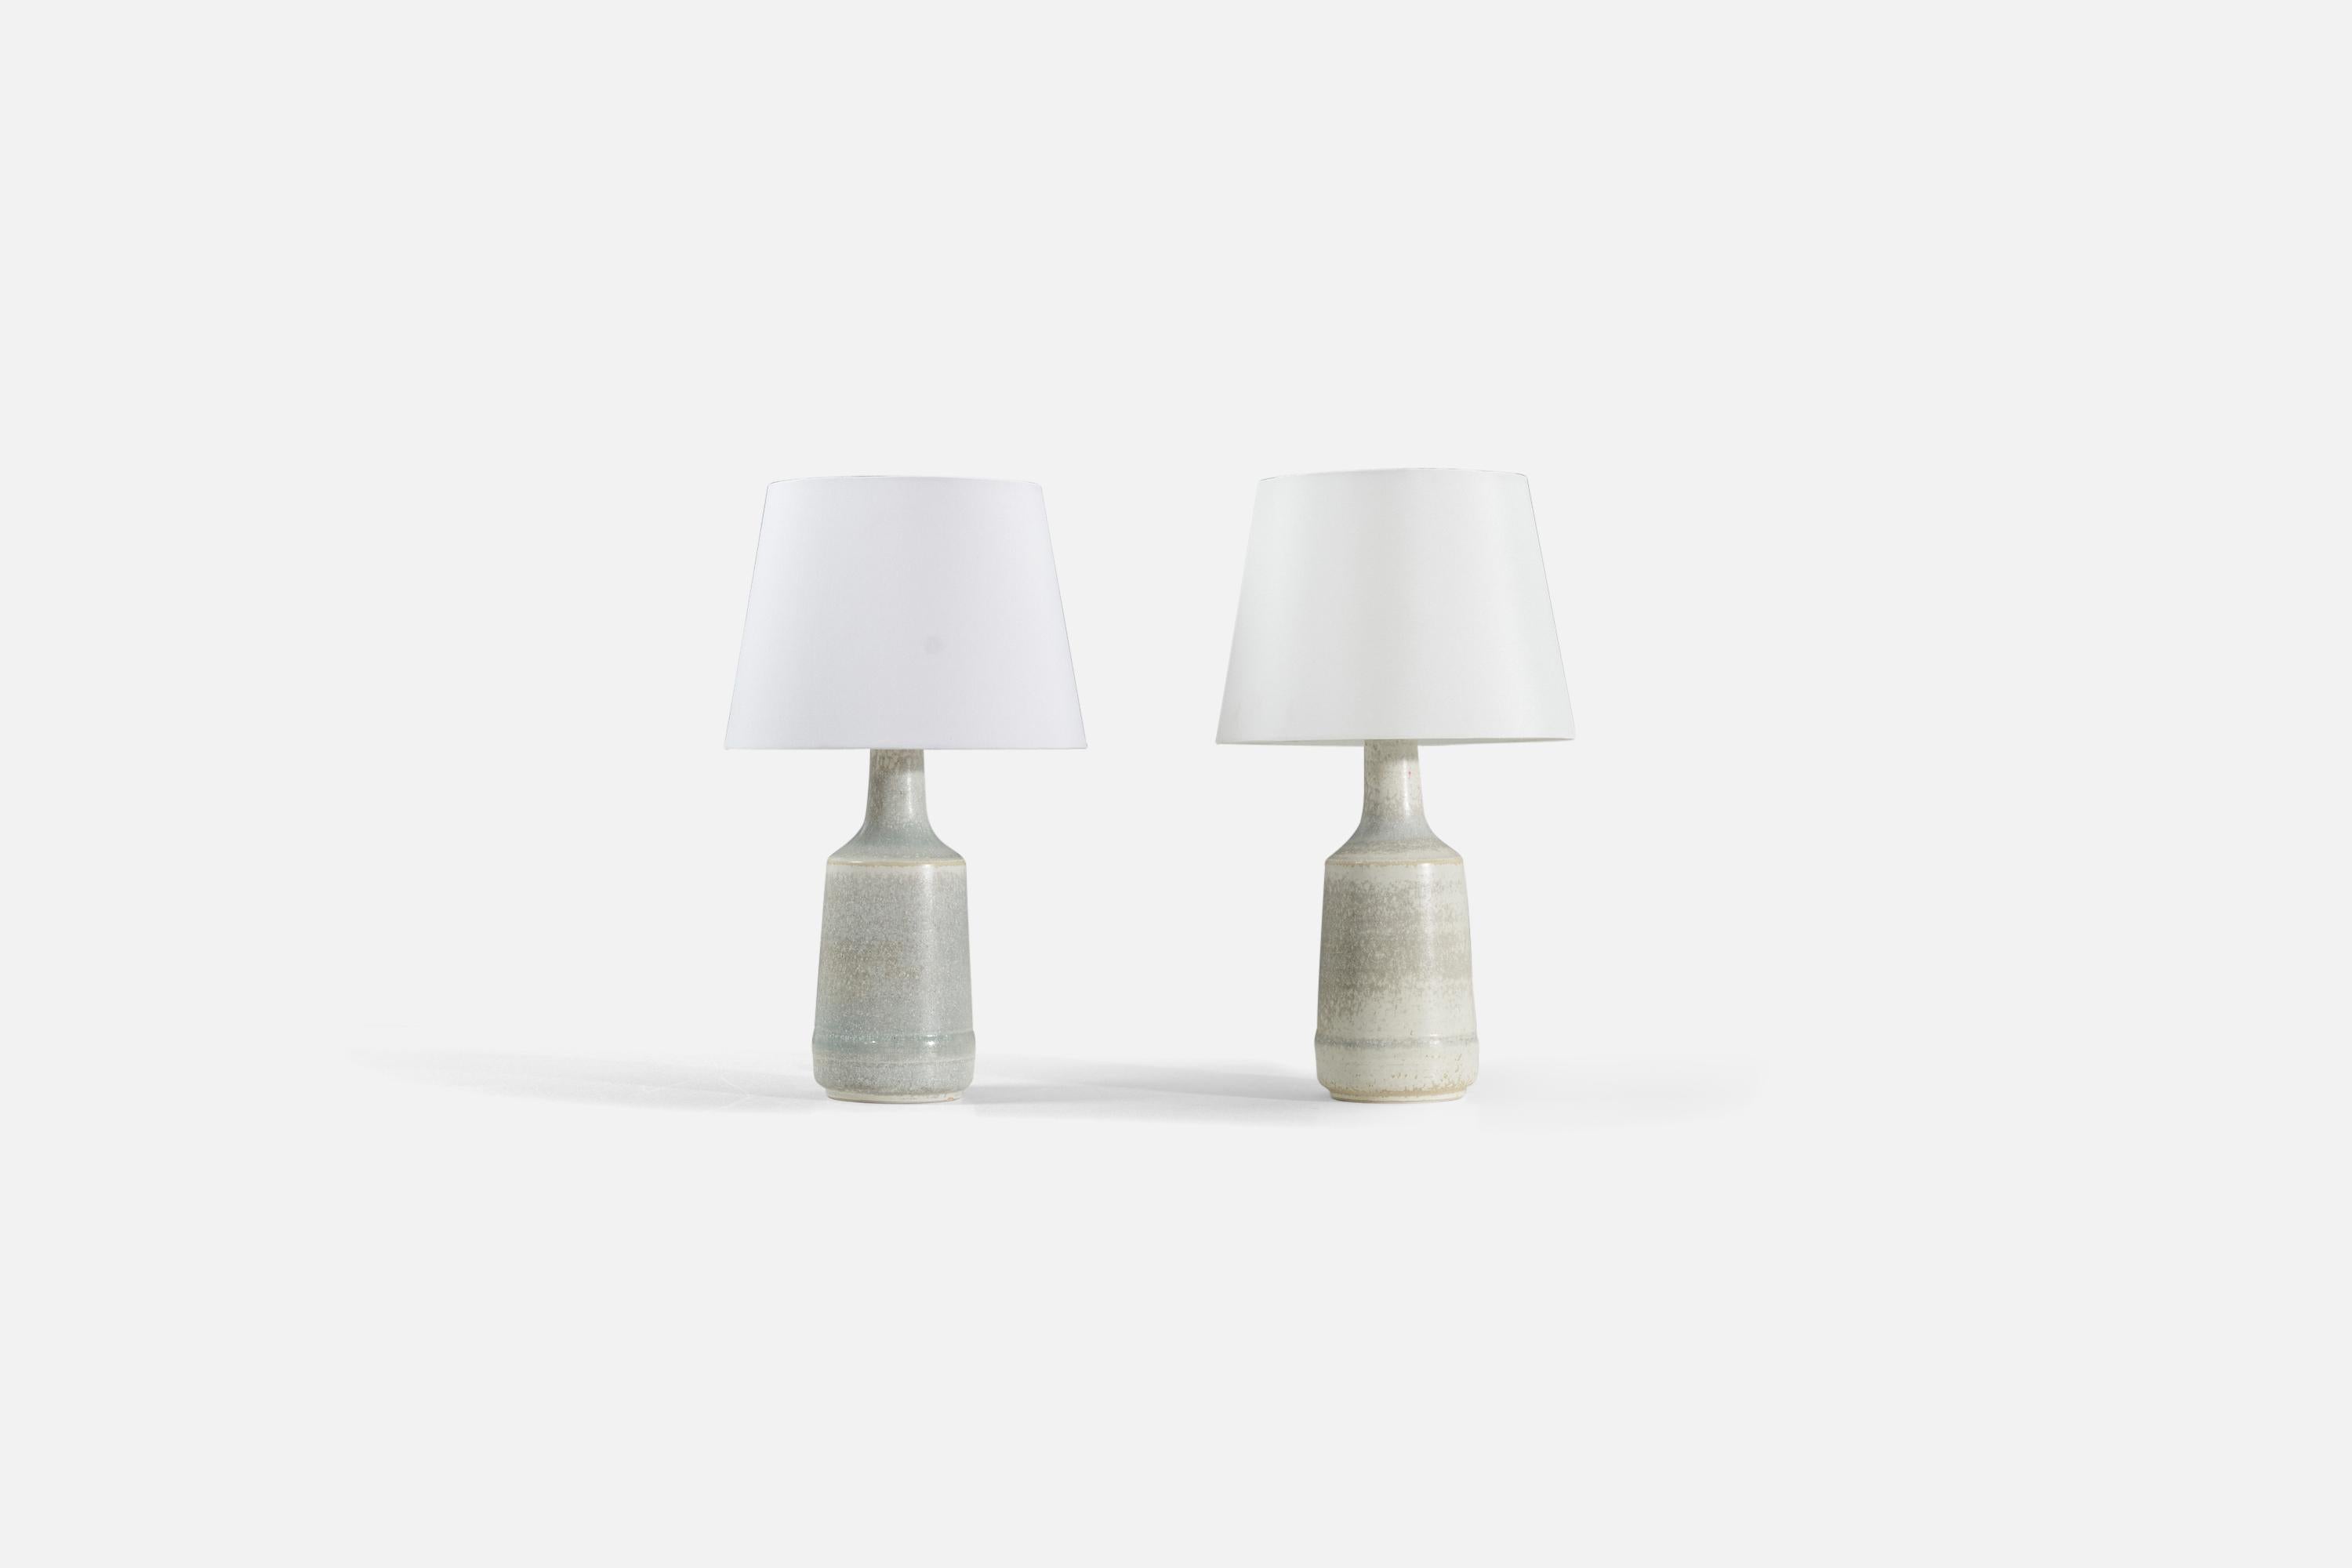 A pair of light gray glazed stoneware table lamps, designed and produced by Desiree Stentøj, Denmark, 1960s. 

Sold without lampshade. Stated dimensions exclude lampshade. Height includes socket. 

Illustrated Shade measures: 9 x 12 x 9
Lamp